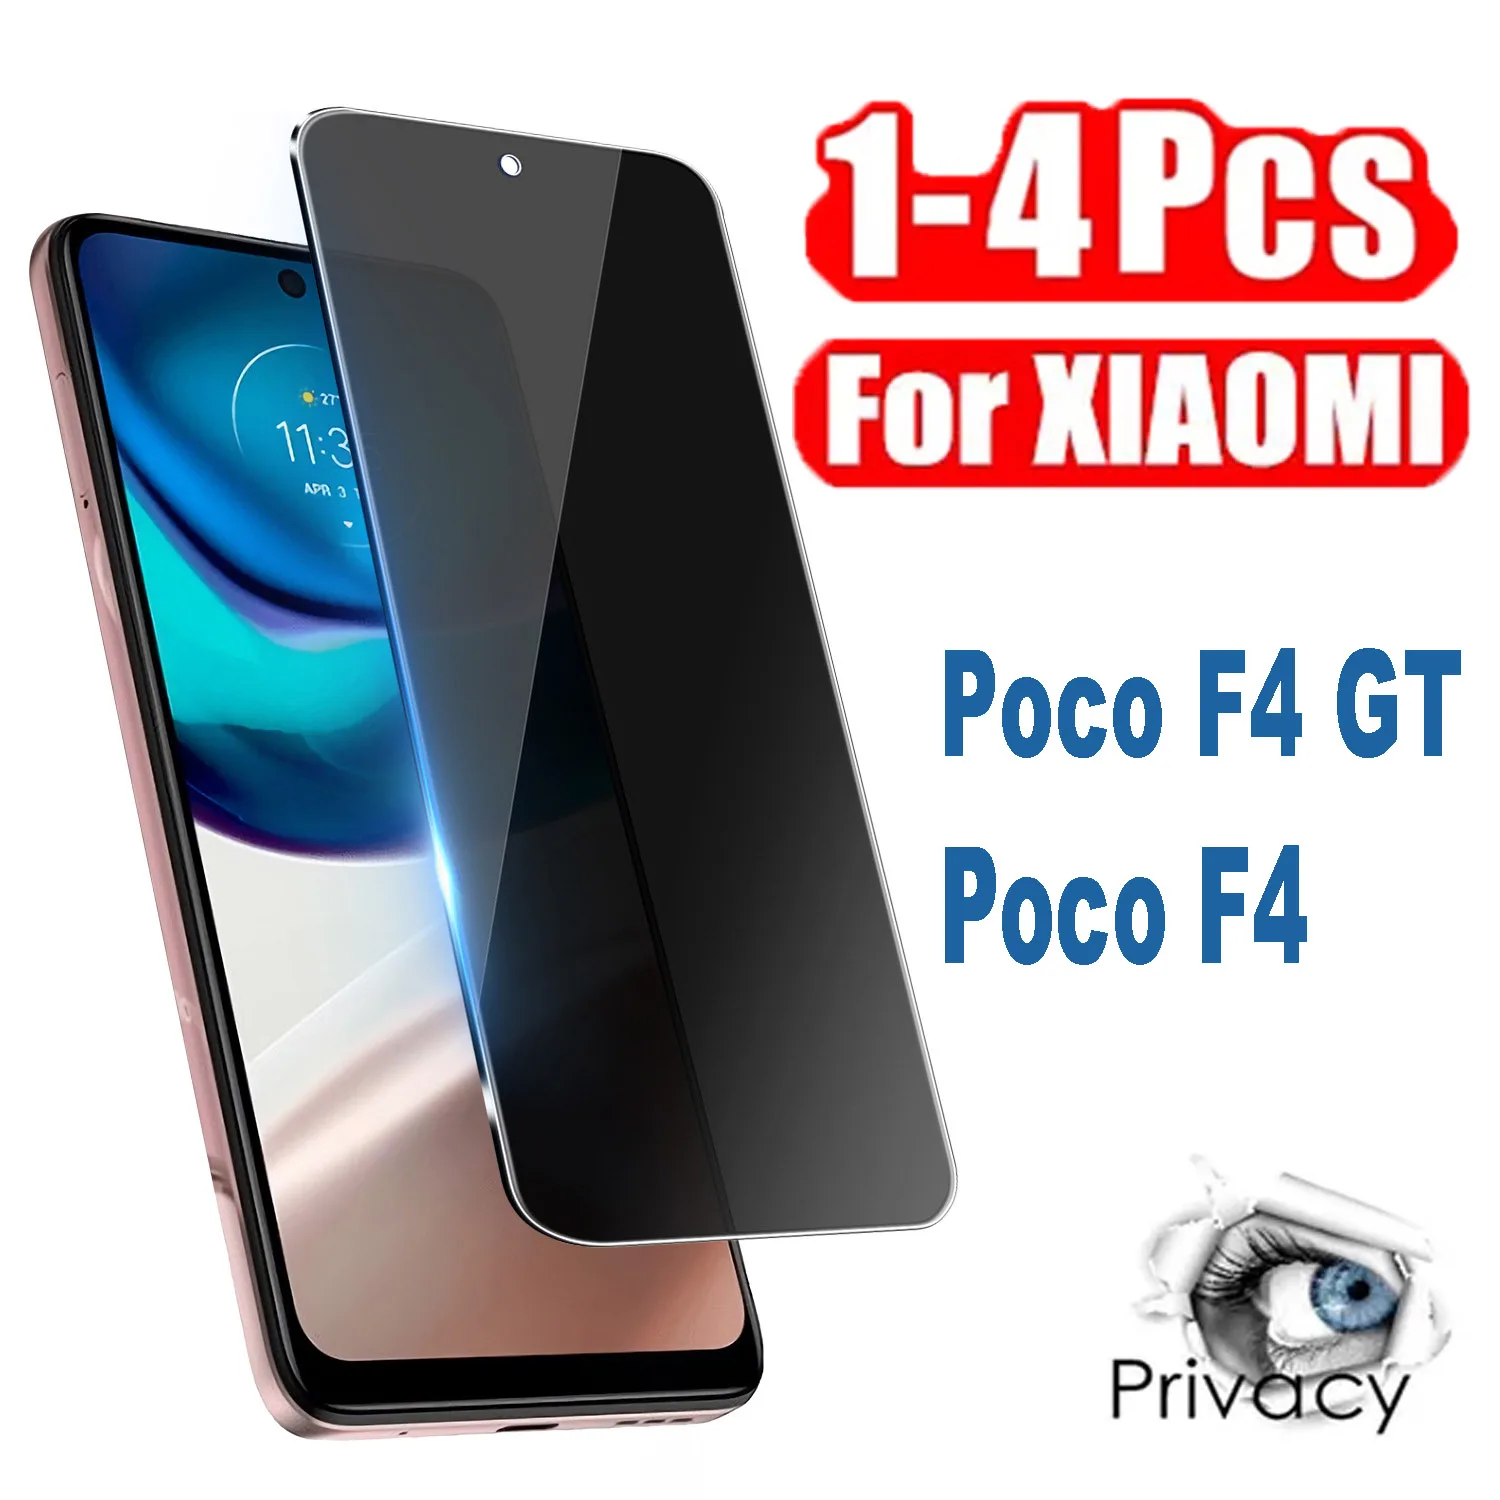 

1-4PCS Anti-spy Protective Tempered Glass for Xiaomi Poco F4 GT Screen Protectors Privacy Glass Films